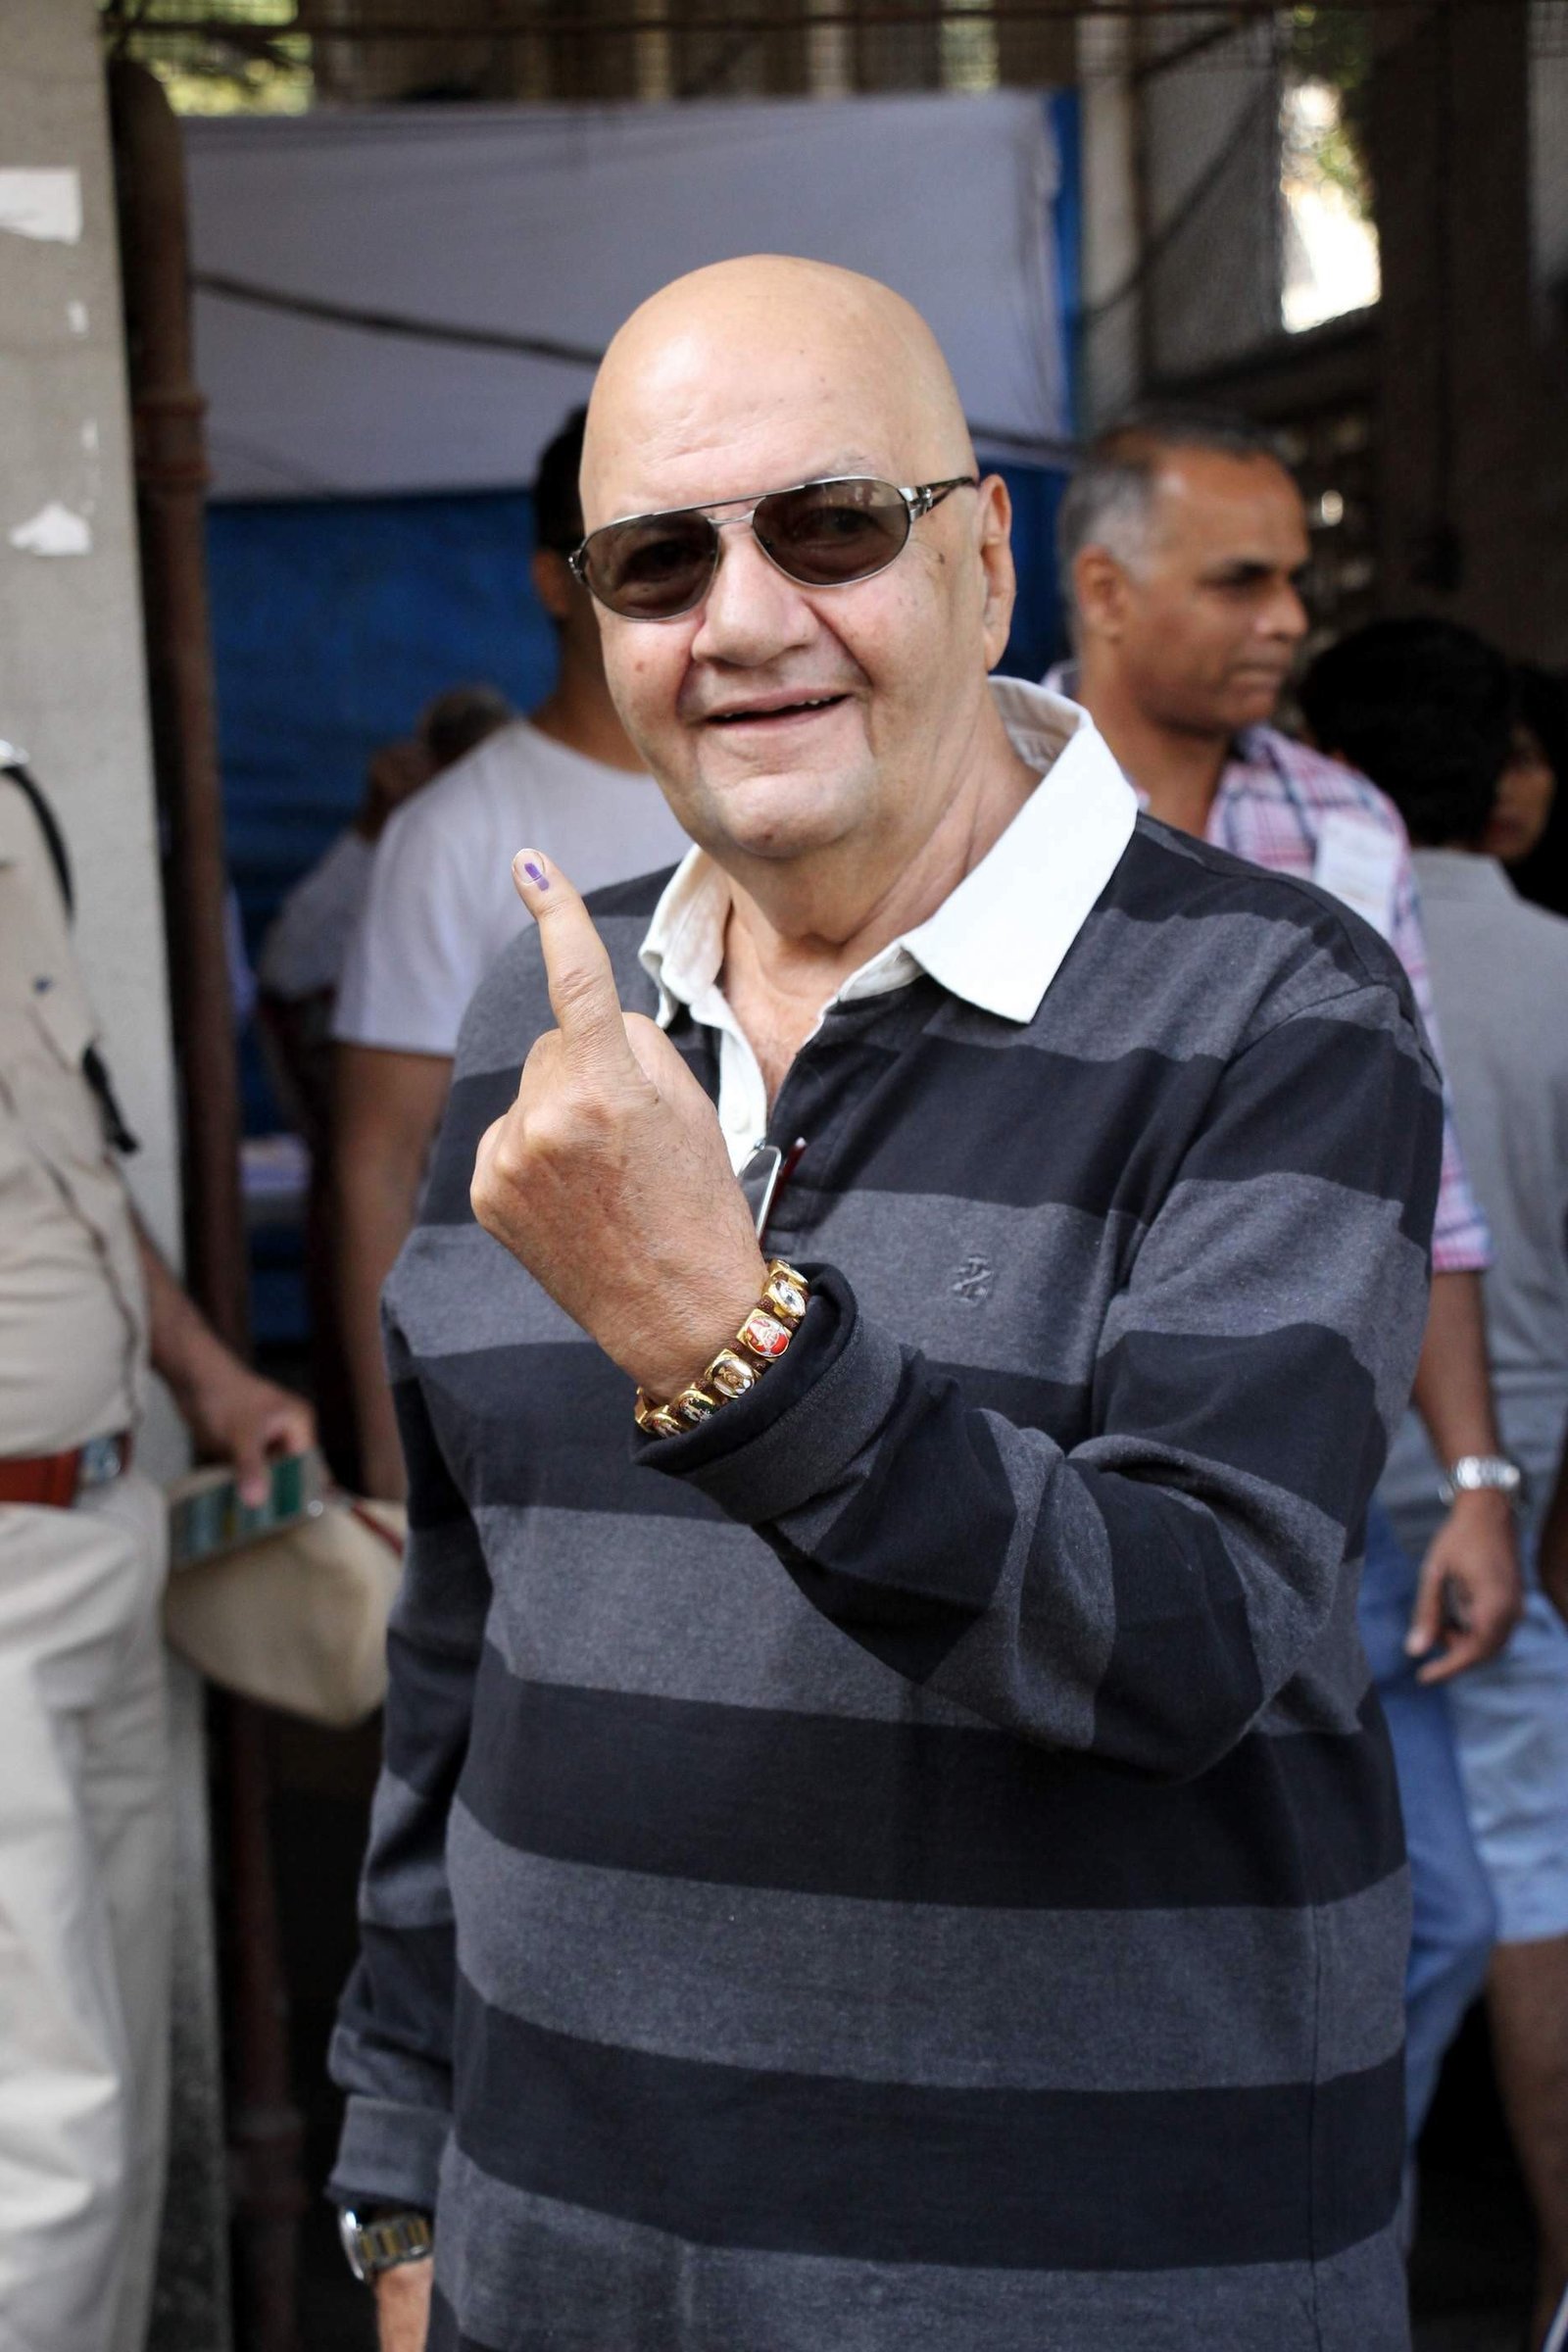 Celebs Casting Their Votes In Bandra for BMC Elections 2017 Images | Picture 1474807